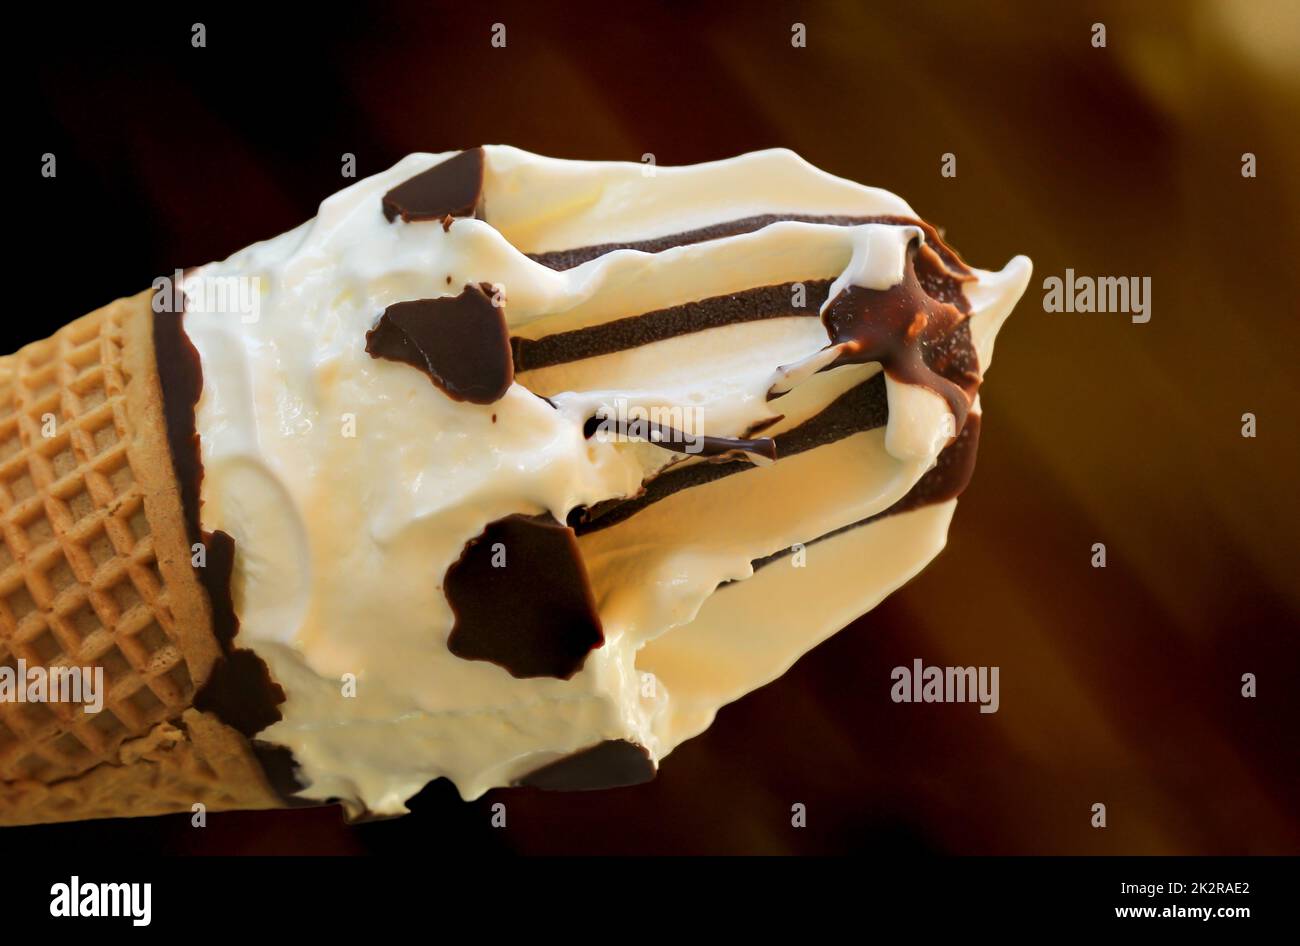 A close-up of a delicious ice cream cone with waffle, vanilla ice cream and chocolate icing. Stock Photo